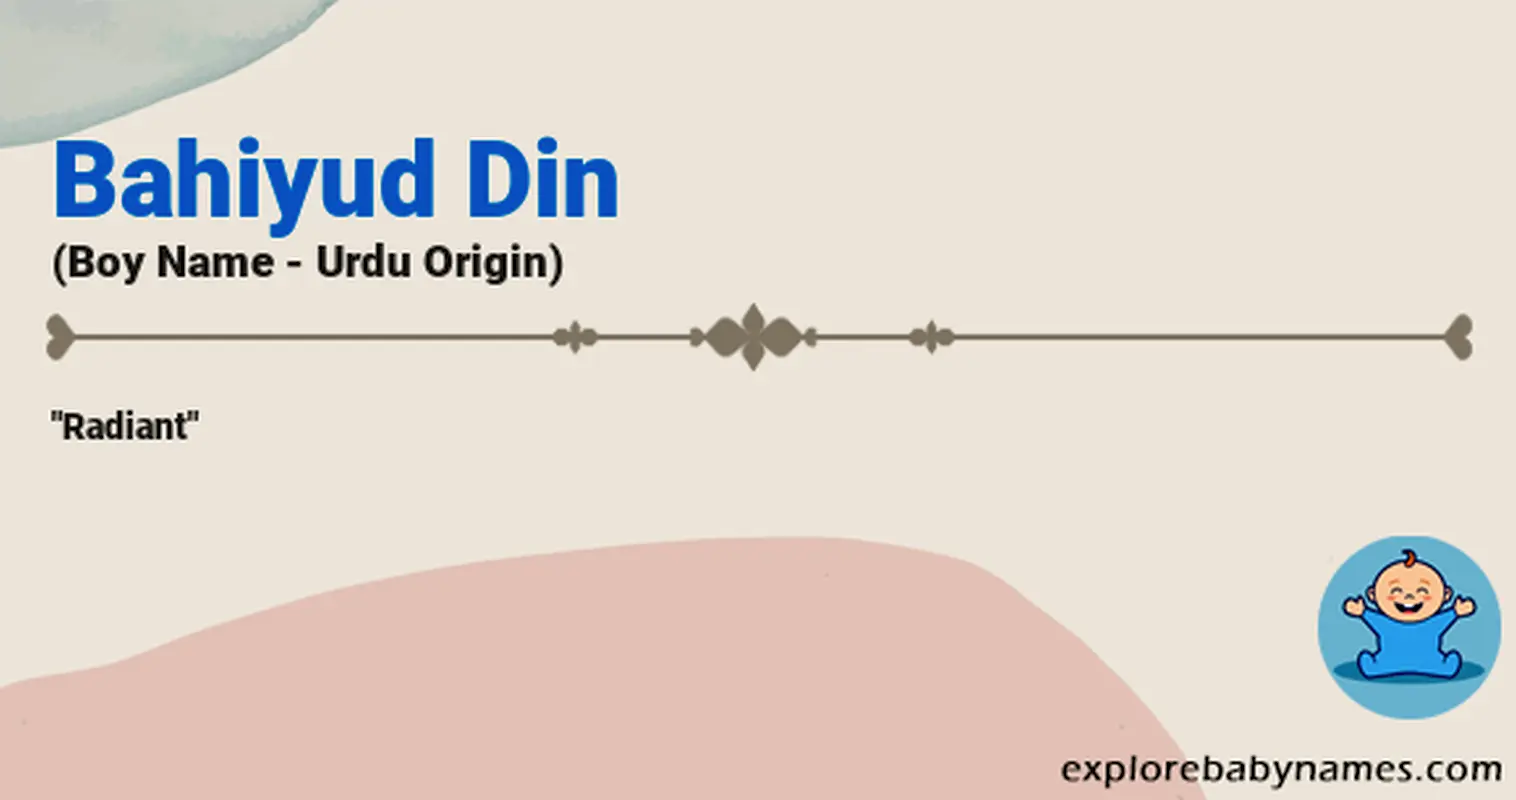 Meaning of Bahiyud Din